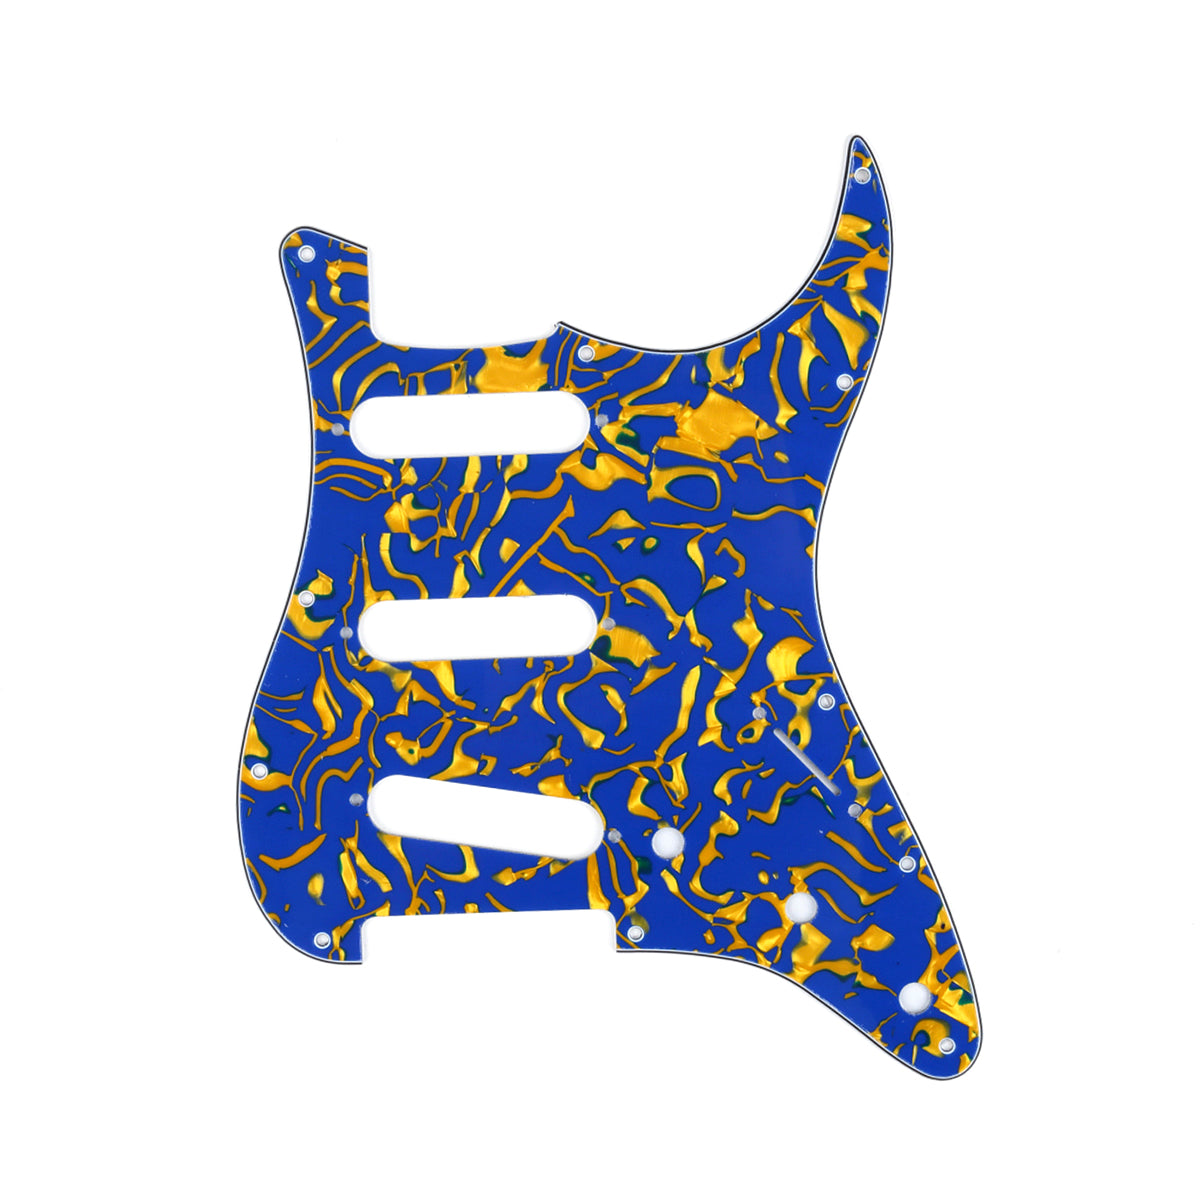 Musiclily SSS 11 Hole Strat Guitar Pickguard for Fender USA/Mexican Made Standard Stratocaster Modern Style, 4Ply Blue Yellow Shell